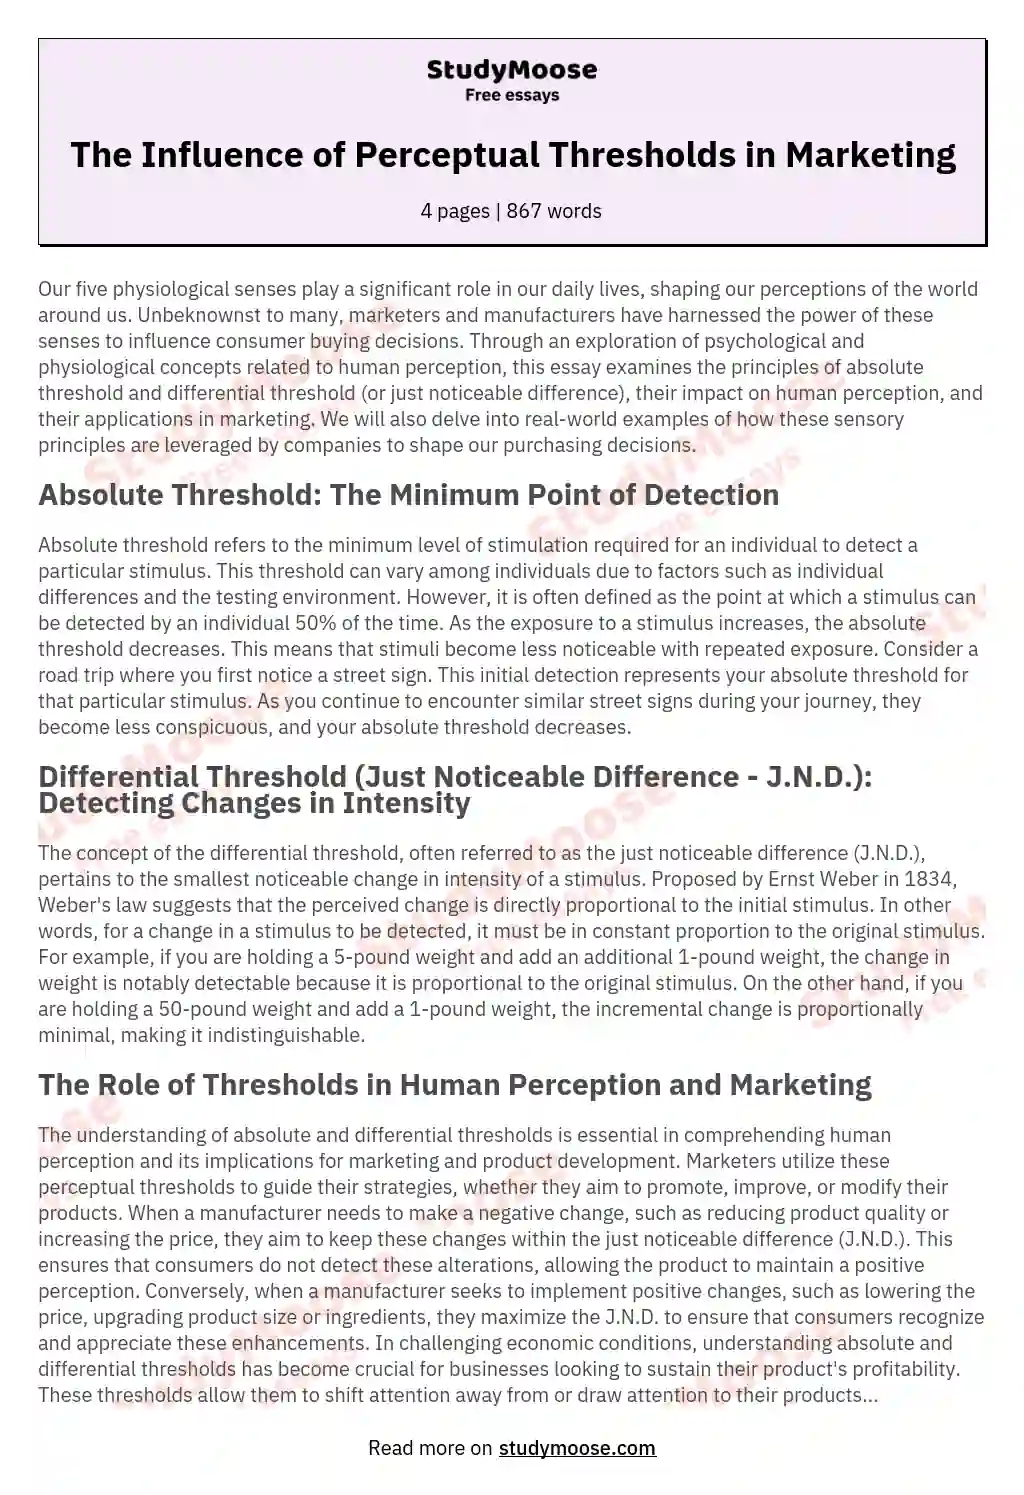 The Influence of Perceptual Thresholds in Marketing essay